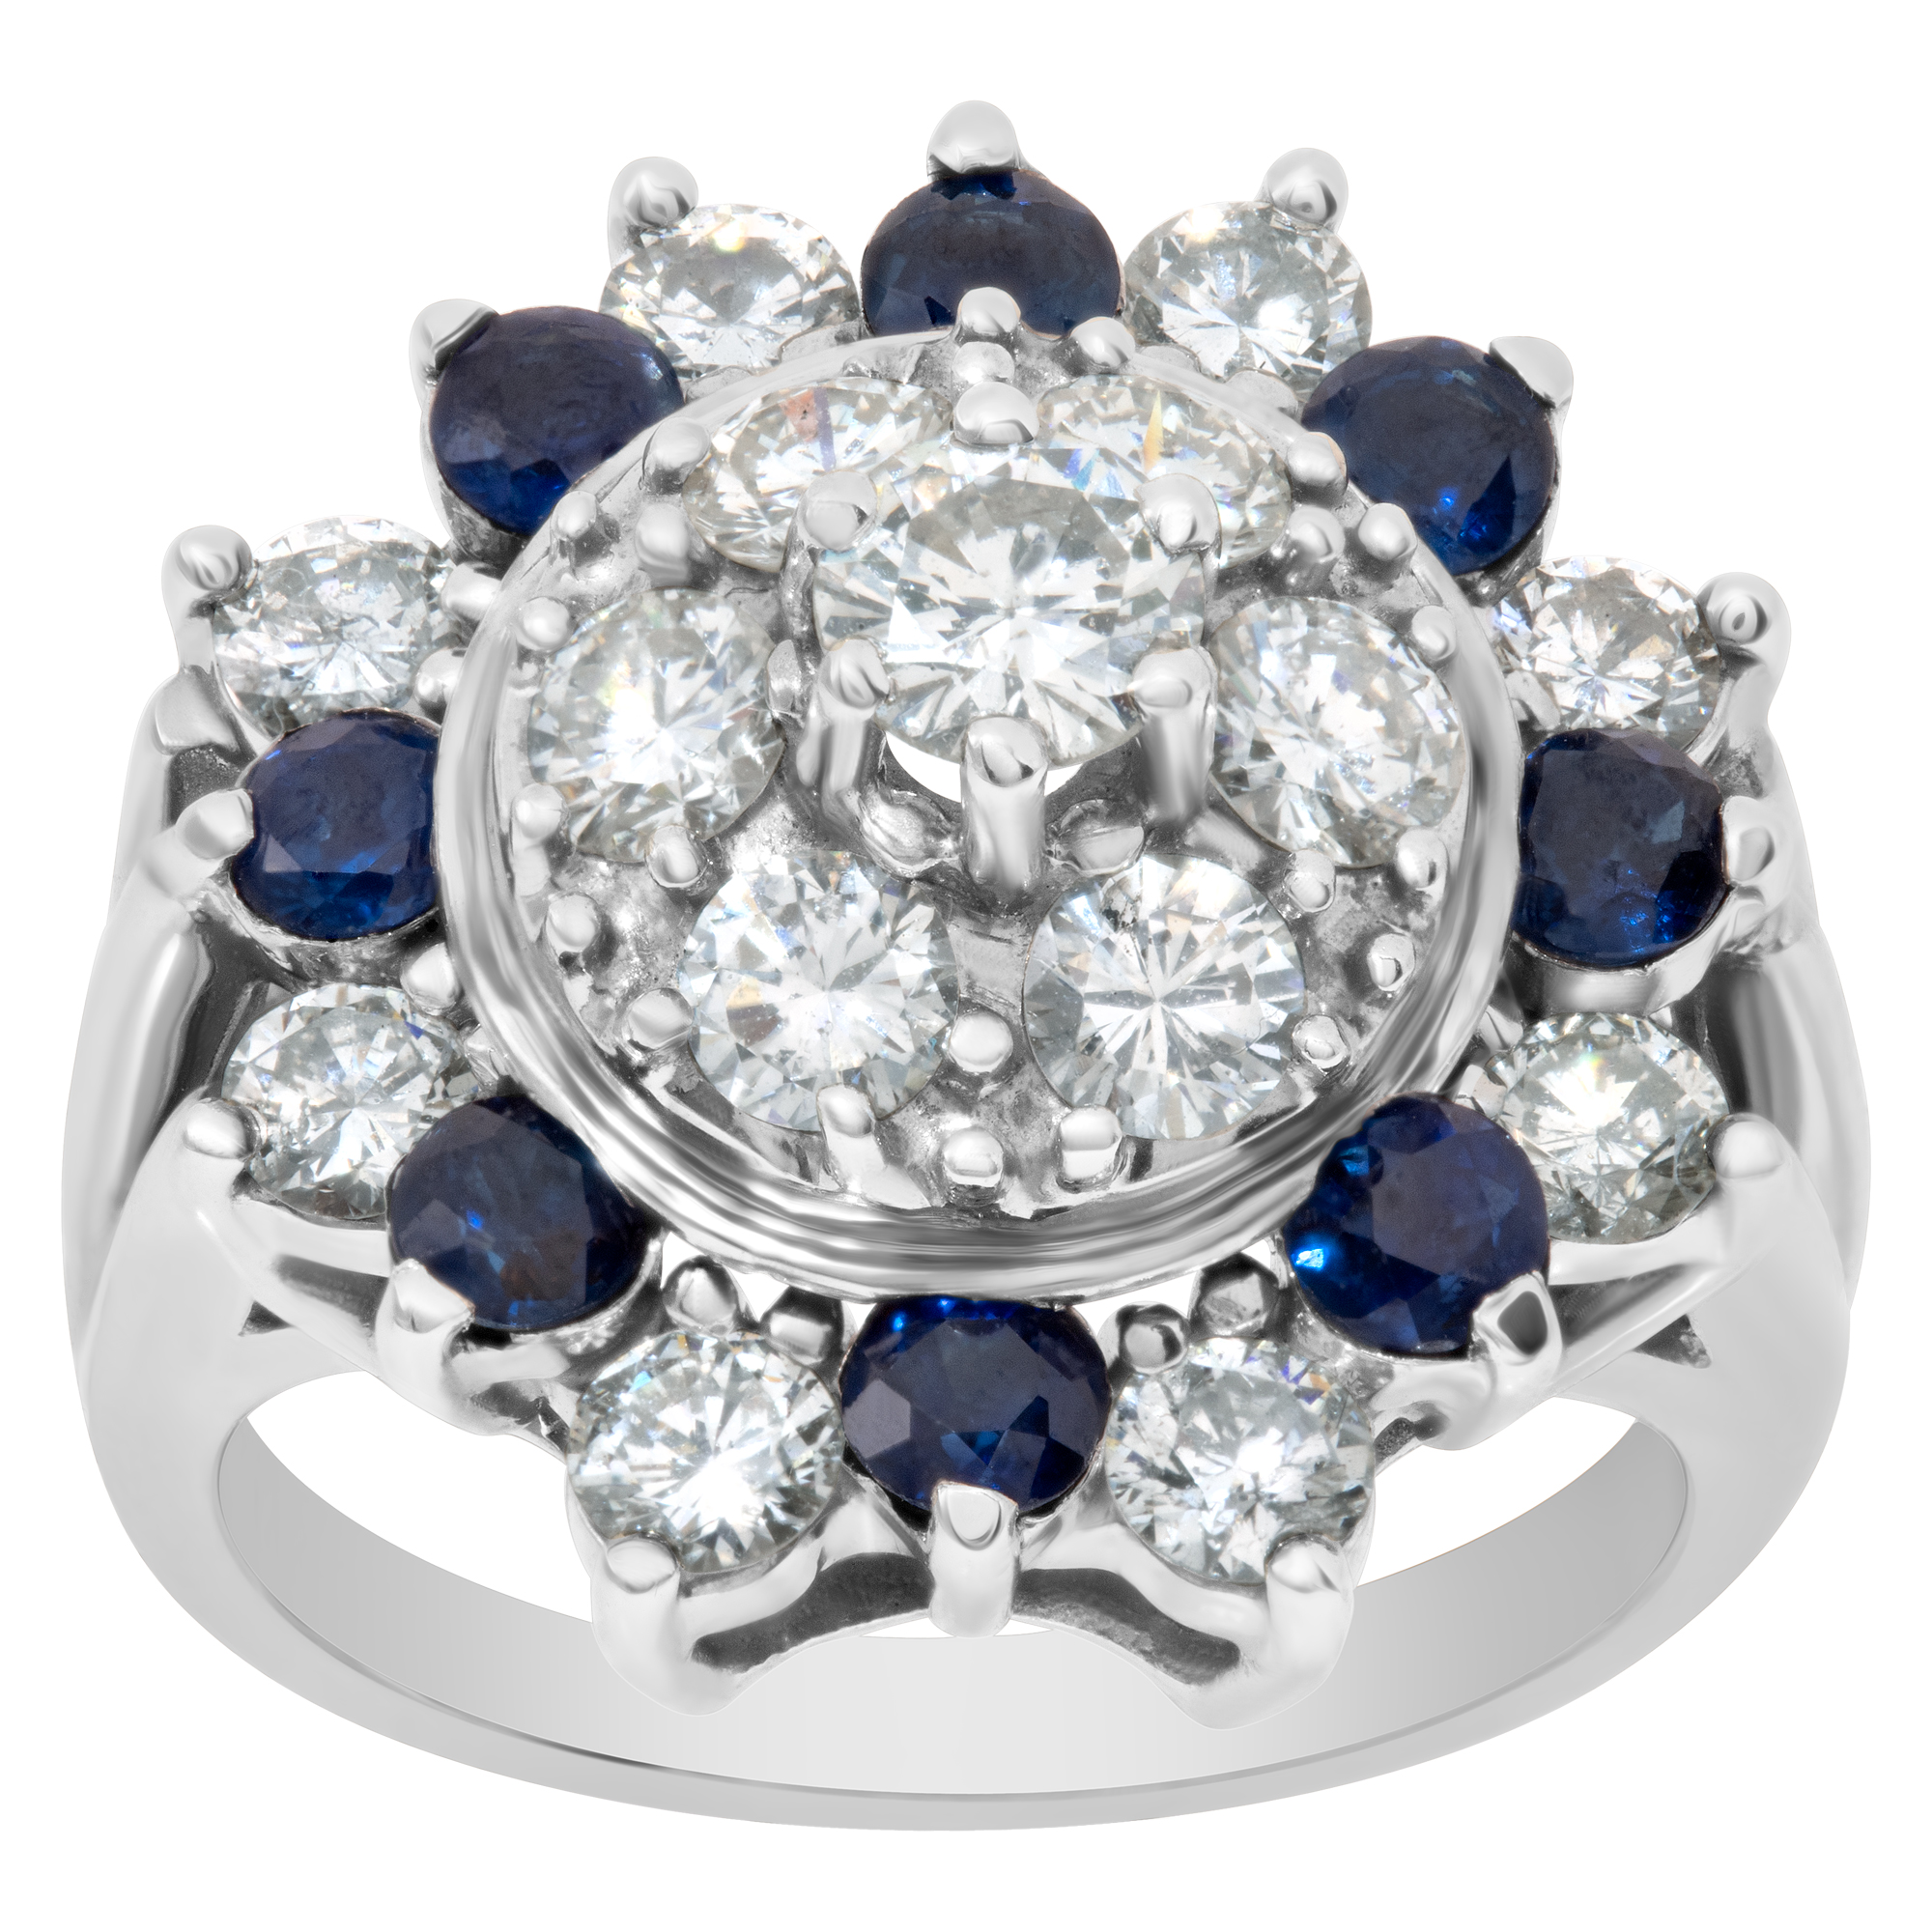 Vintage diamonds and sapphire ring set in 14K white gold. Round brilliant cut diamonds total approx weight over 2.00 carats.